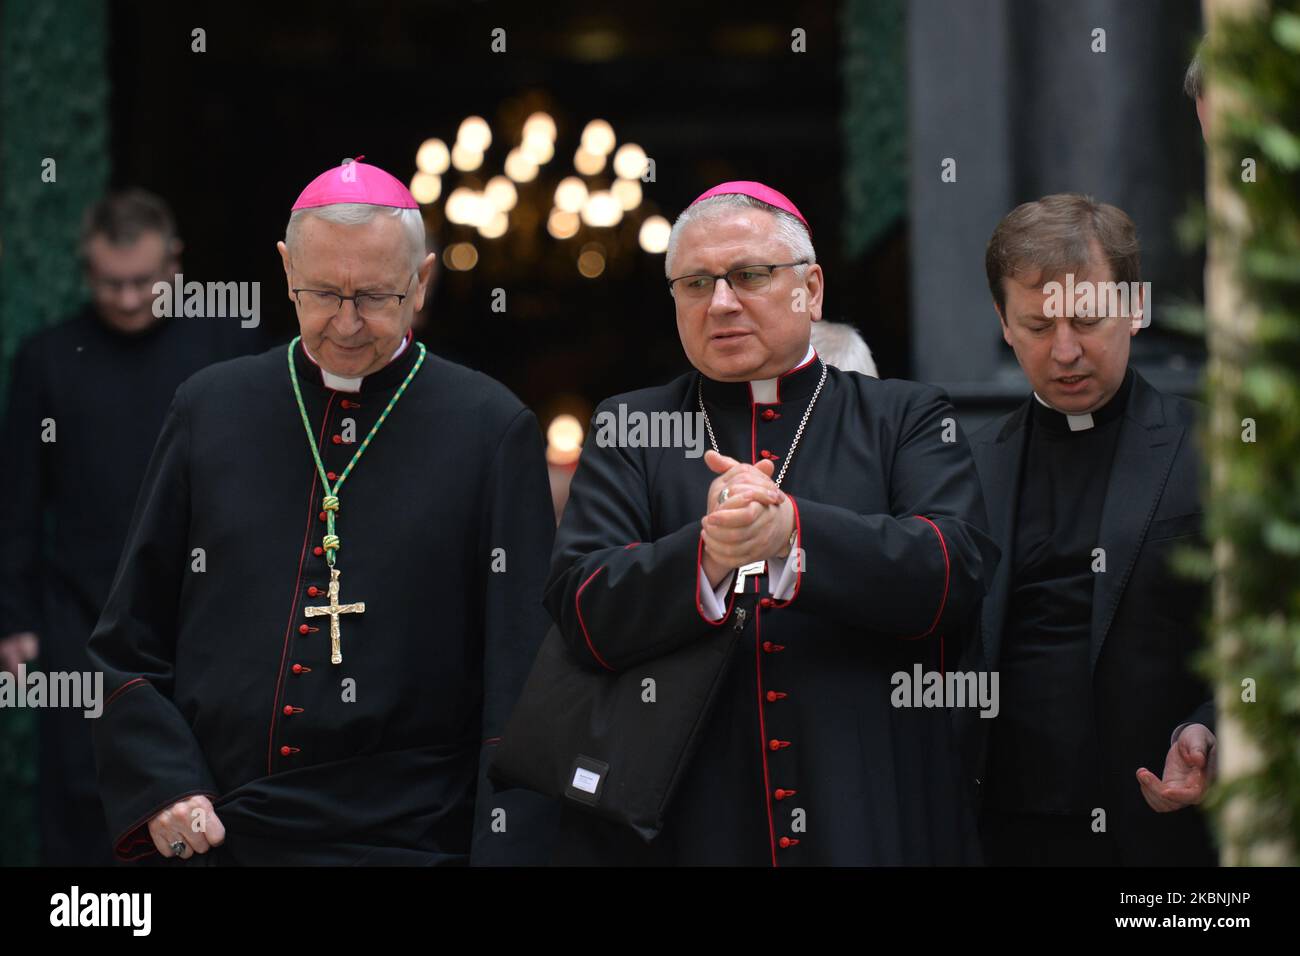 (L-R) Archbishop Stanislaw Gadecki and Bishop Artur G. Mizinski, leaving Wawel Cathedral, after the Holy Mass on the occasion of the feast of Saint Stanislaus, bishop and martyr, the main patron of Poland, with the participation of the Polish Episcopate. On Sunday, May 10, 2020, in Wawel Cathedral, Krakow, Poland. (Photo by Artur Widak/NurPhoto) Stock Photo